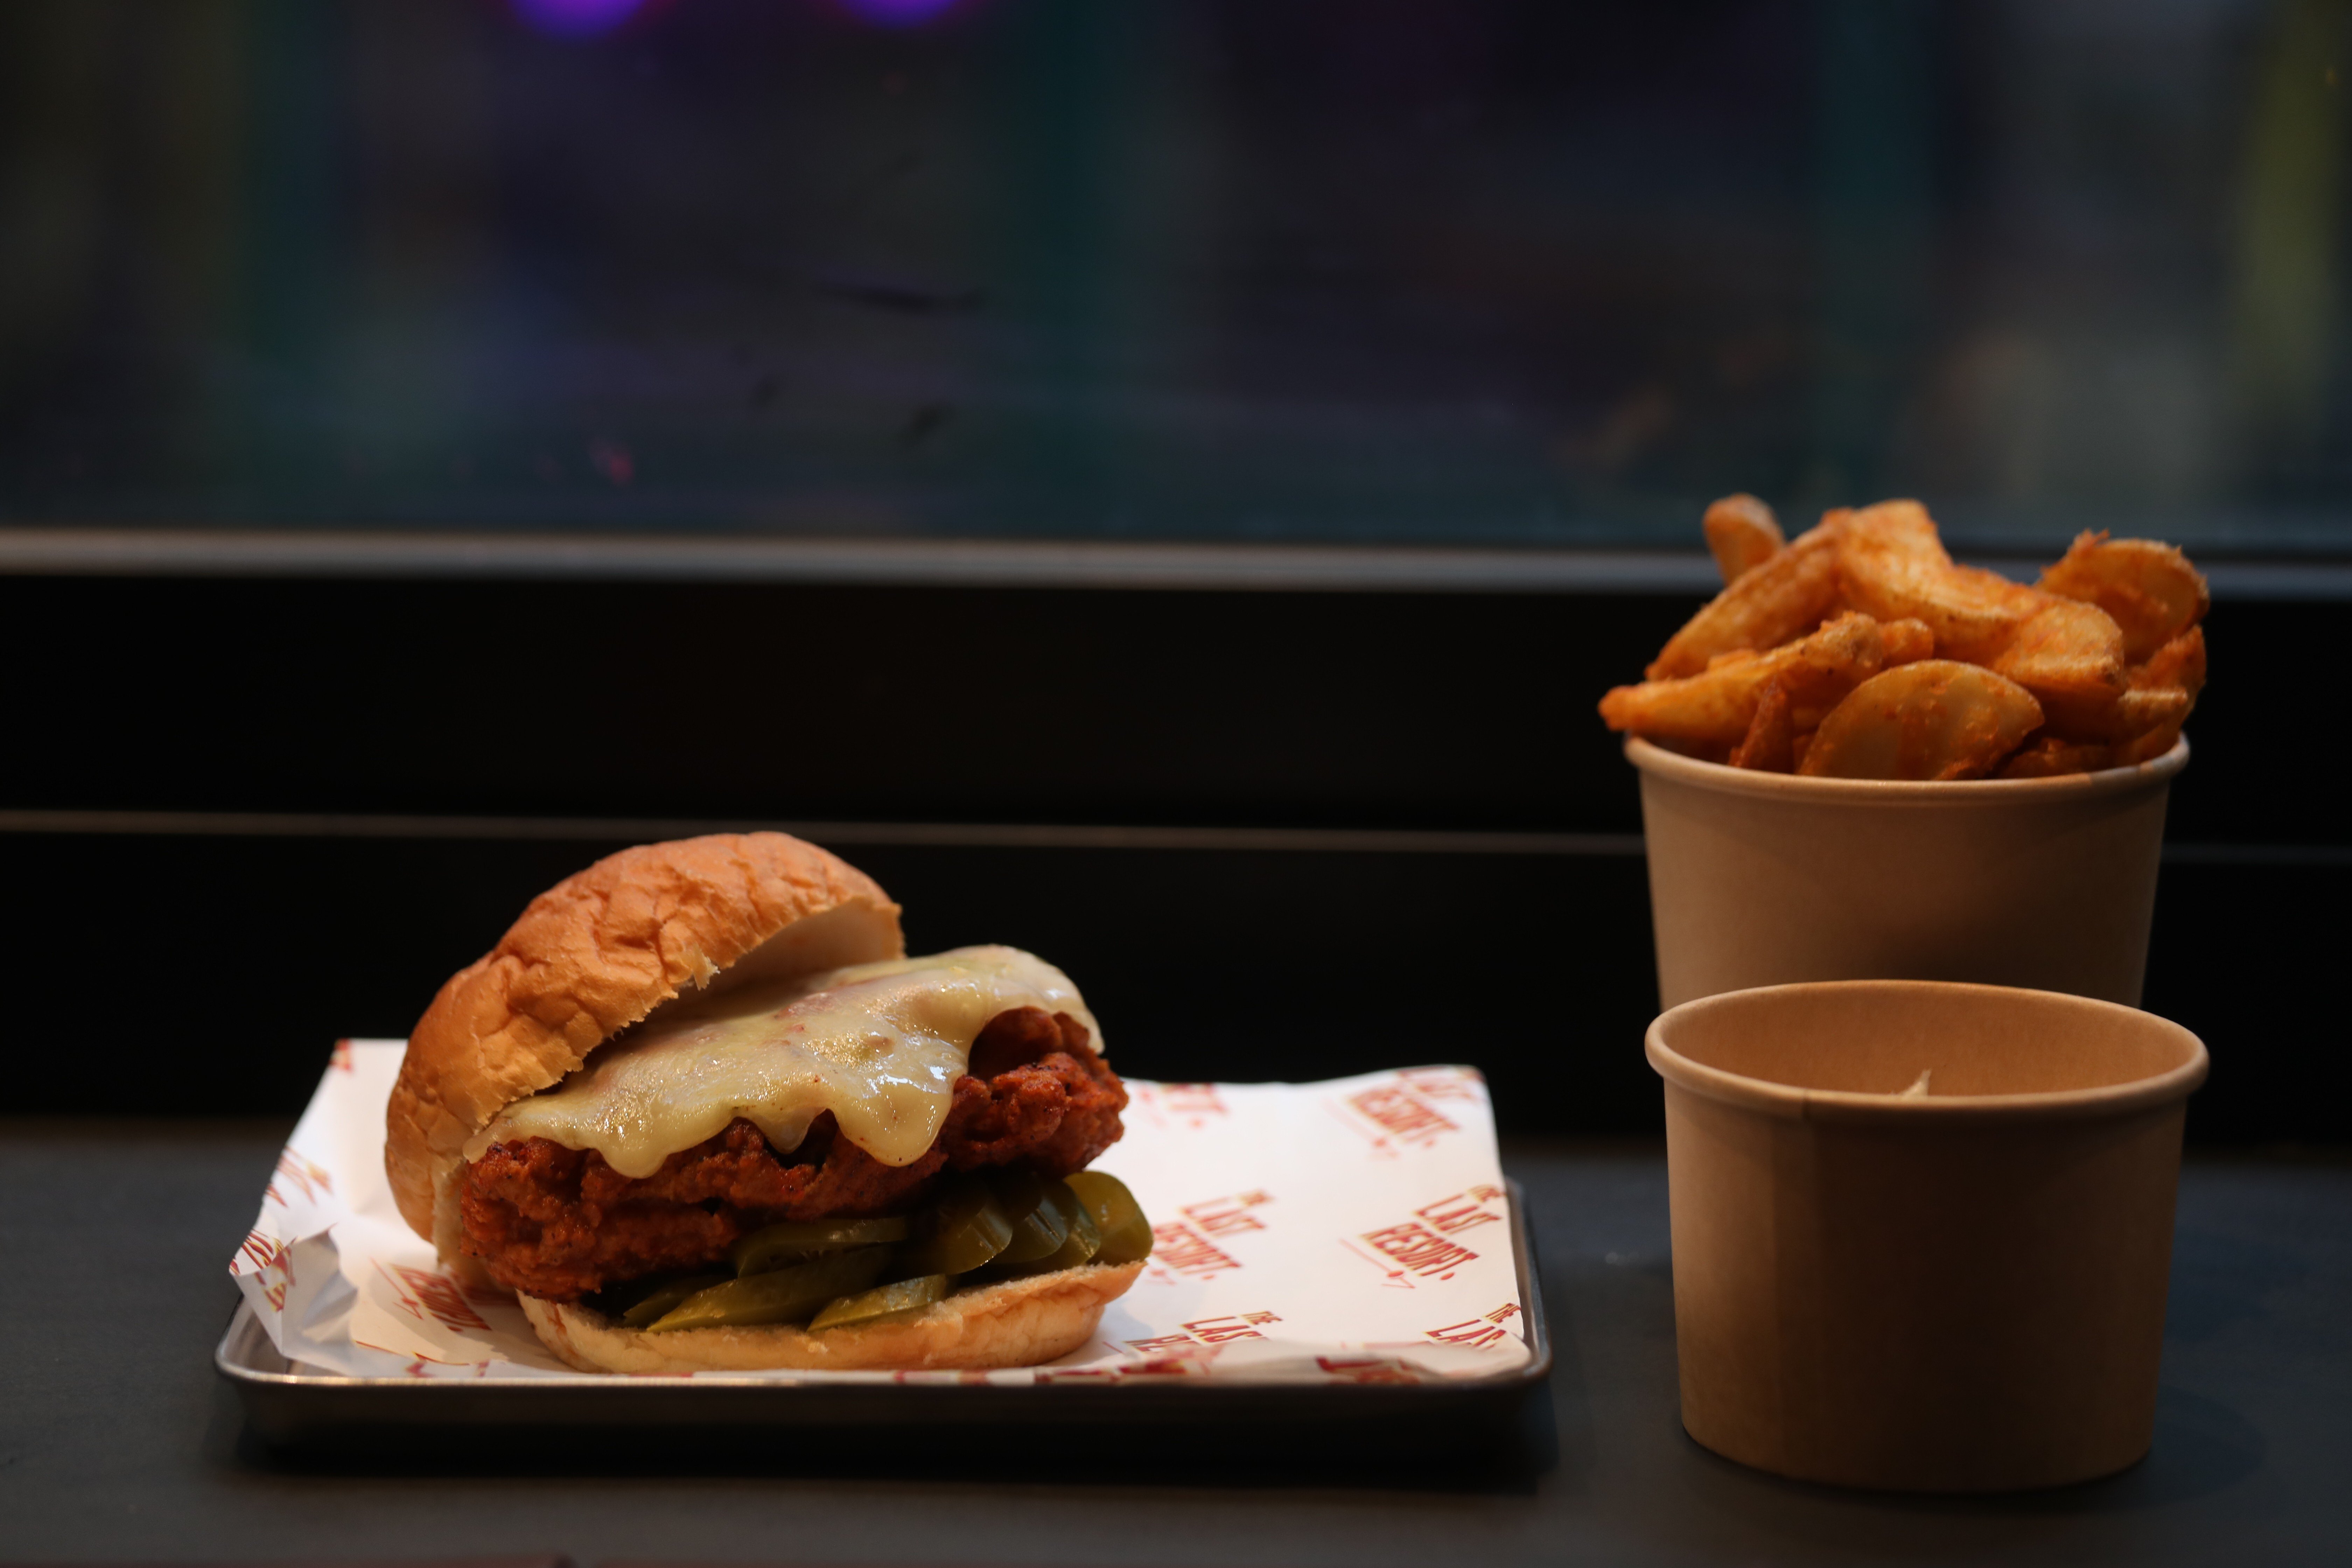 Chicken sandwich and potato wedges at The Last Resort in Central. Photo: Xiaomei Chen